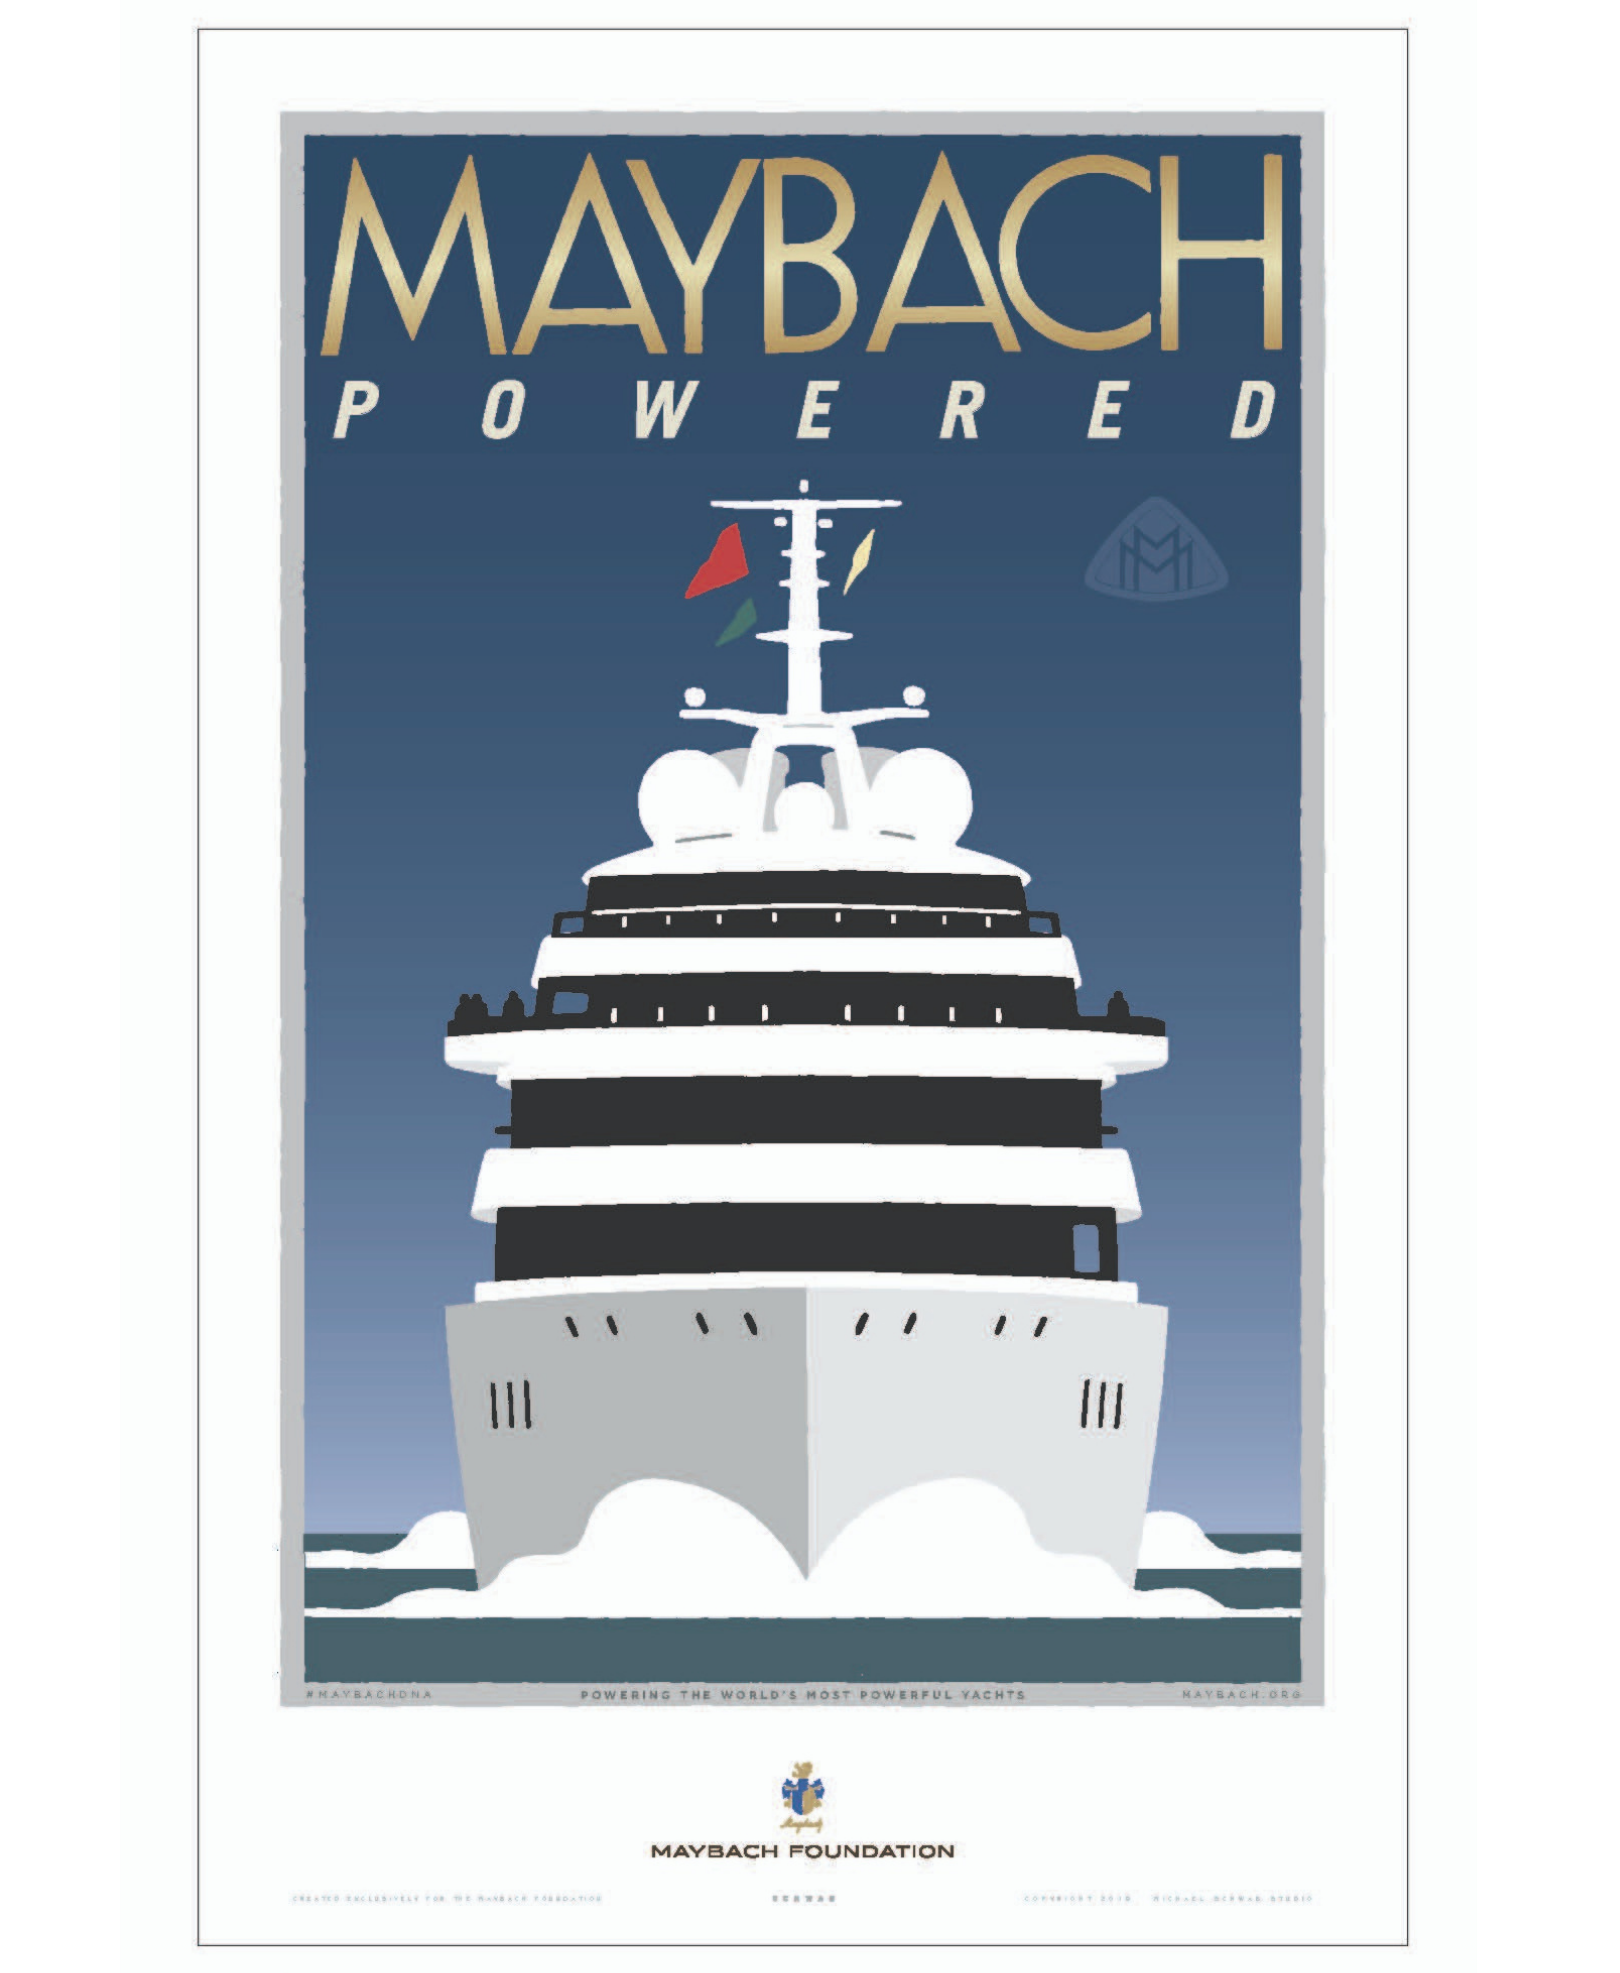 poster of a yacht